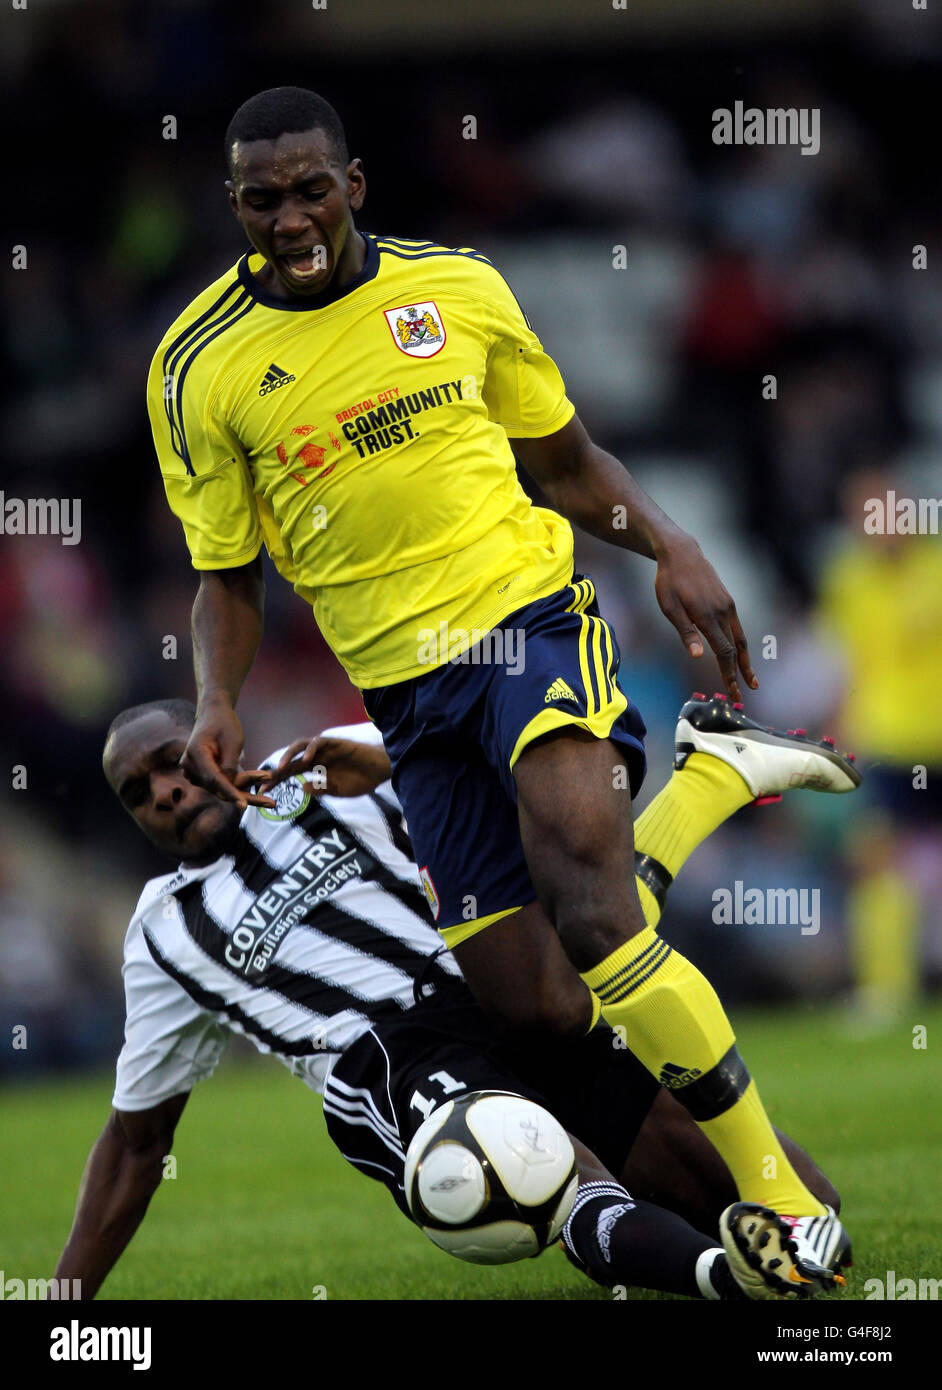 Bristol City's Yannick Bolasie is tackled by Kieron Forbes of Forest green Rovers during the pre season friendly match at the New Lawn, Forest Green, Nailsworth Tuesday July 26, 2011. Photo credit should read: David Davies/PA Wire. Stock Photo